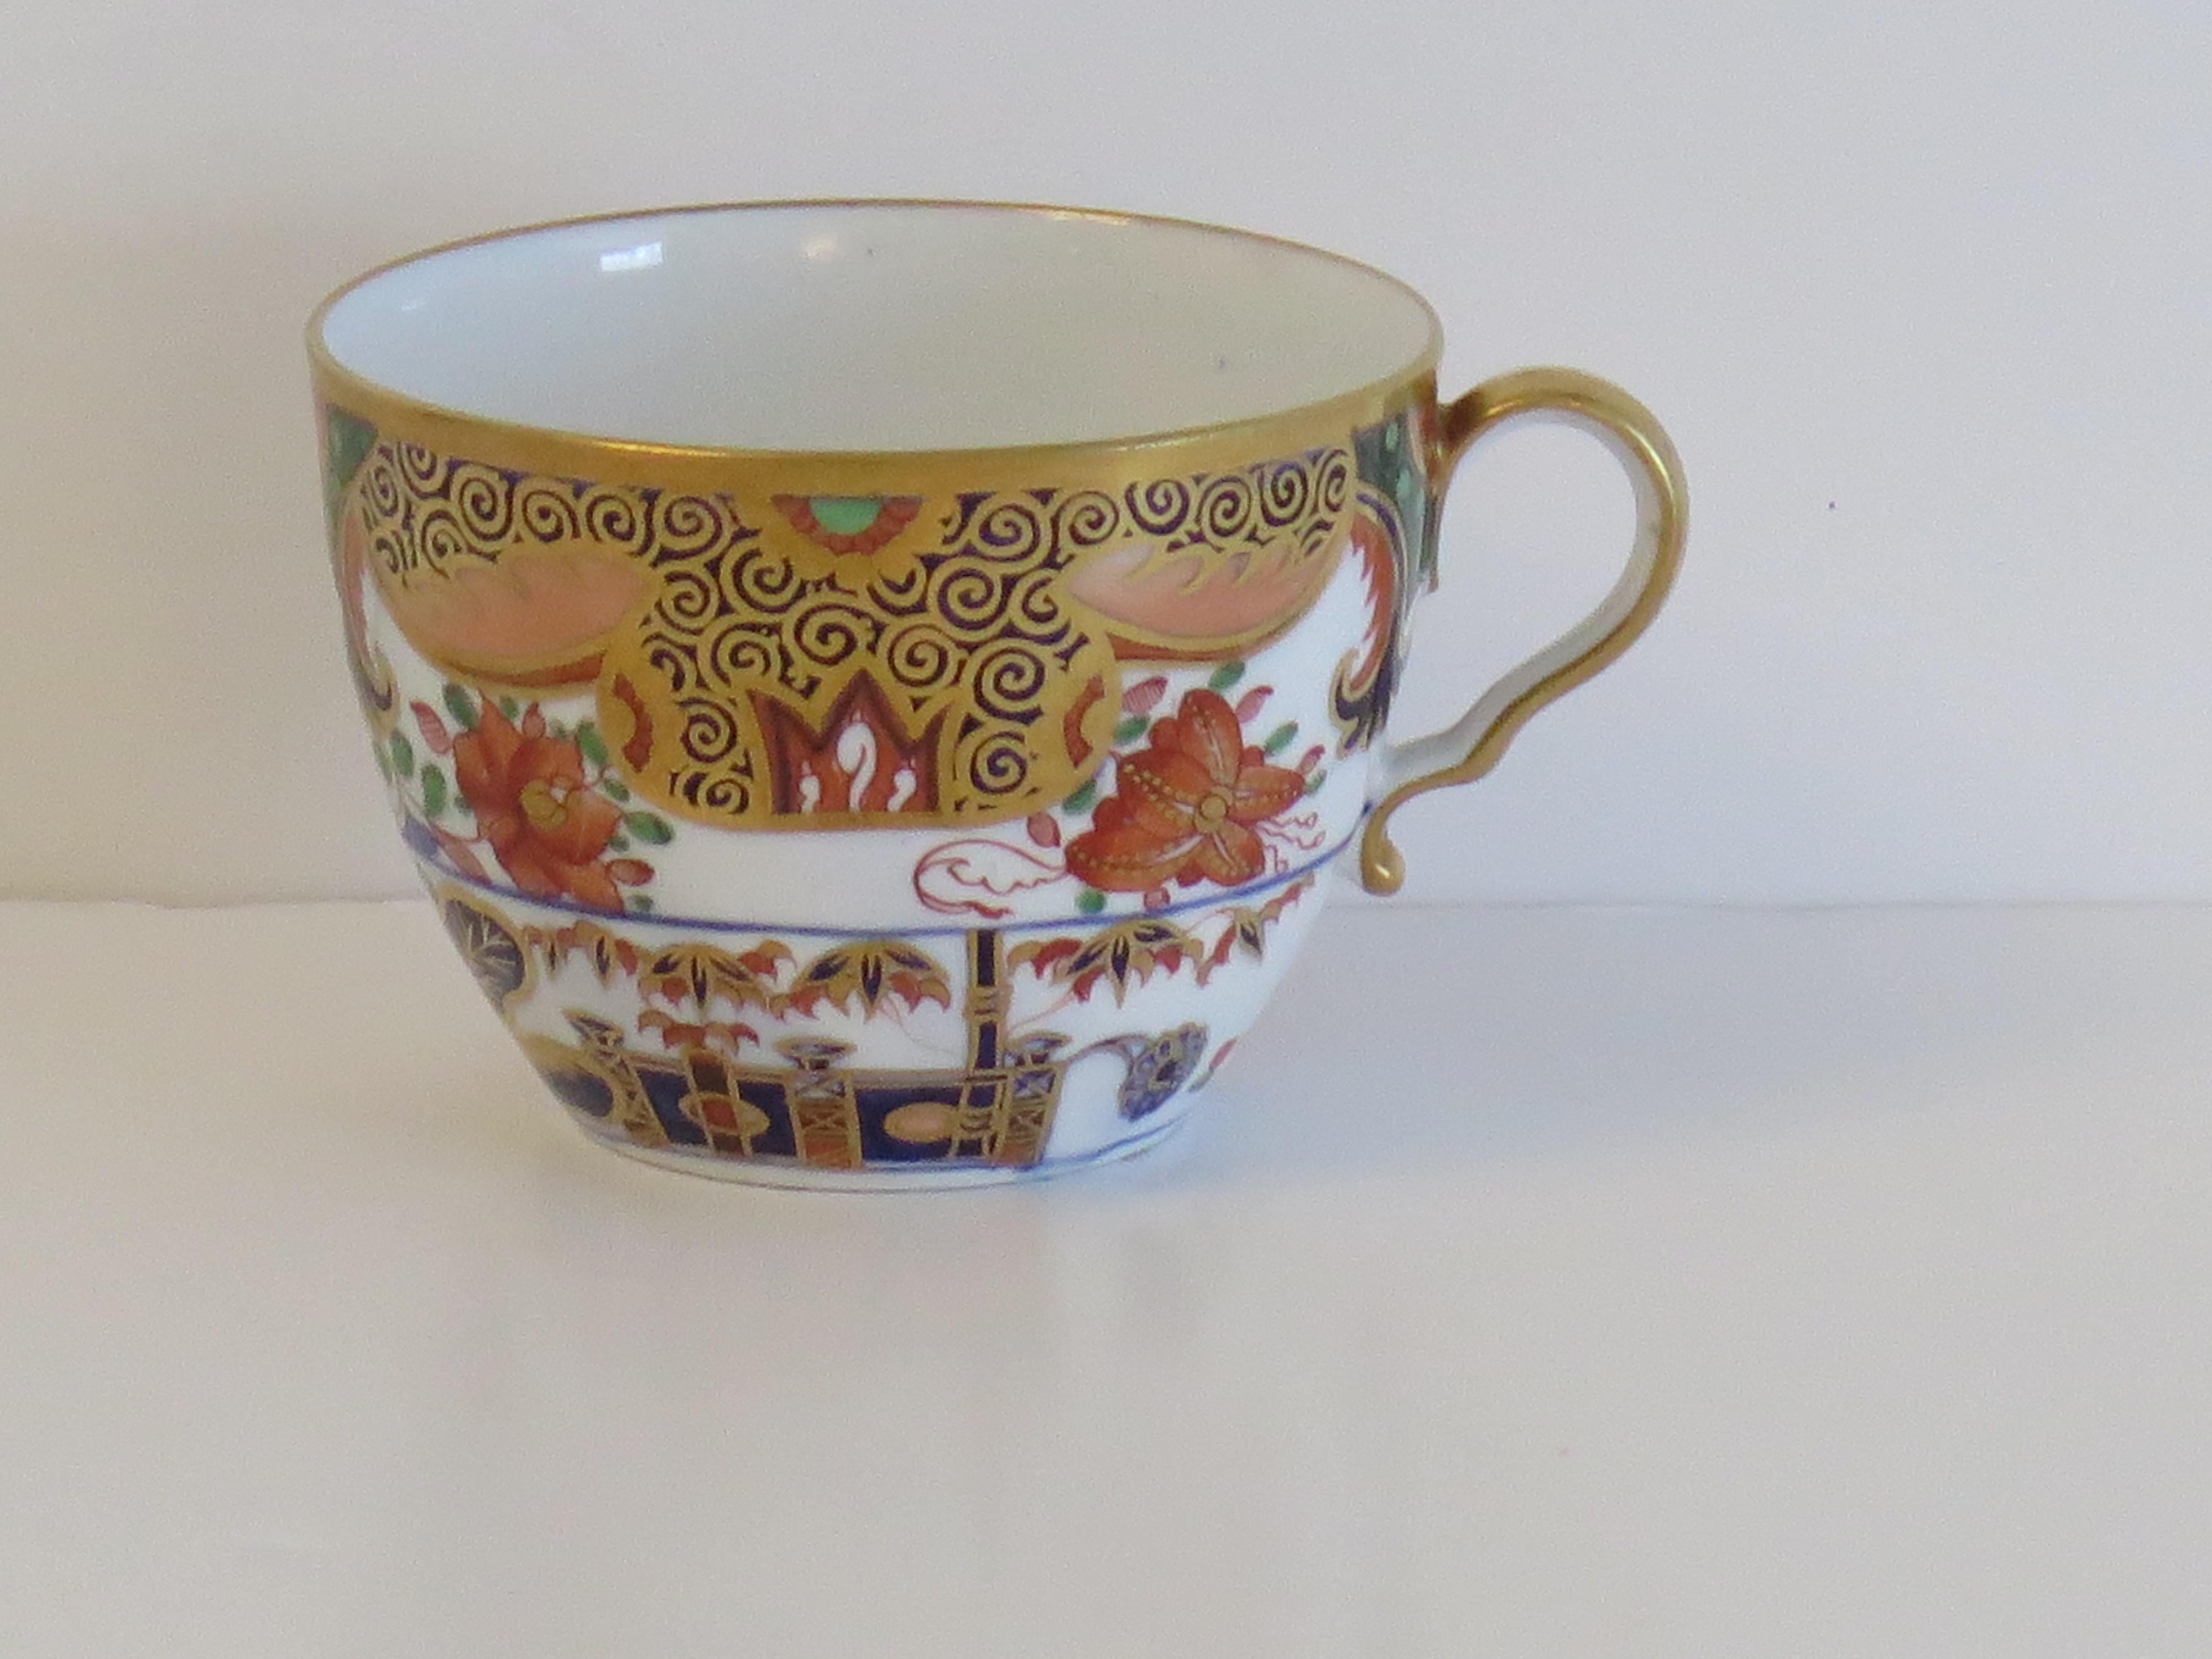 Spode Porcelain Tea Cup in Hand Painted & Gilded Pattern 967, circa 1810 For Sale 4